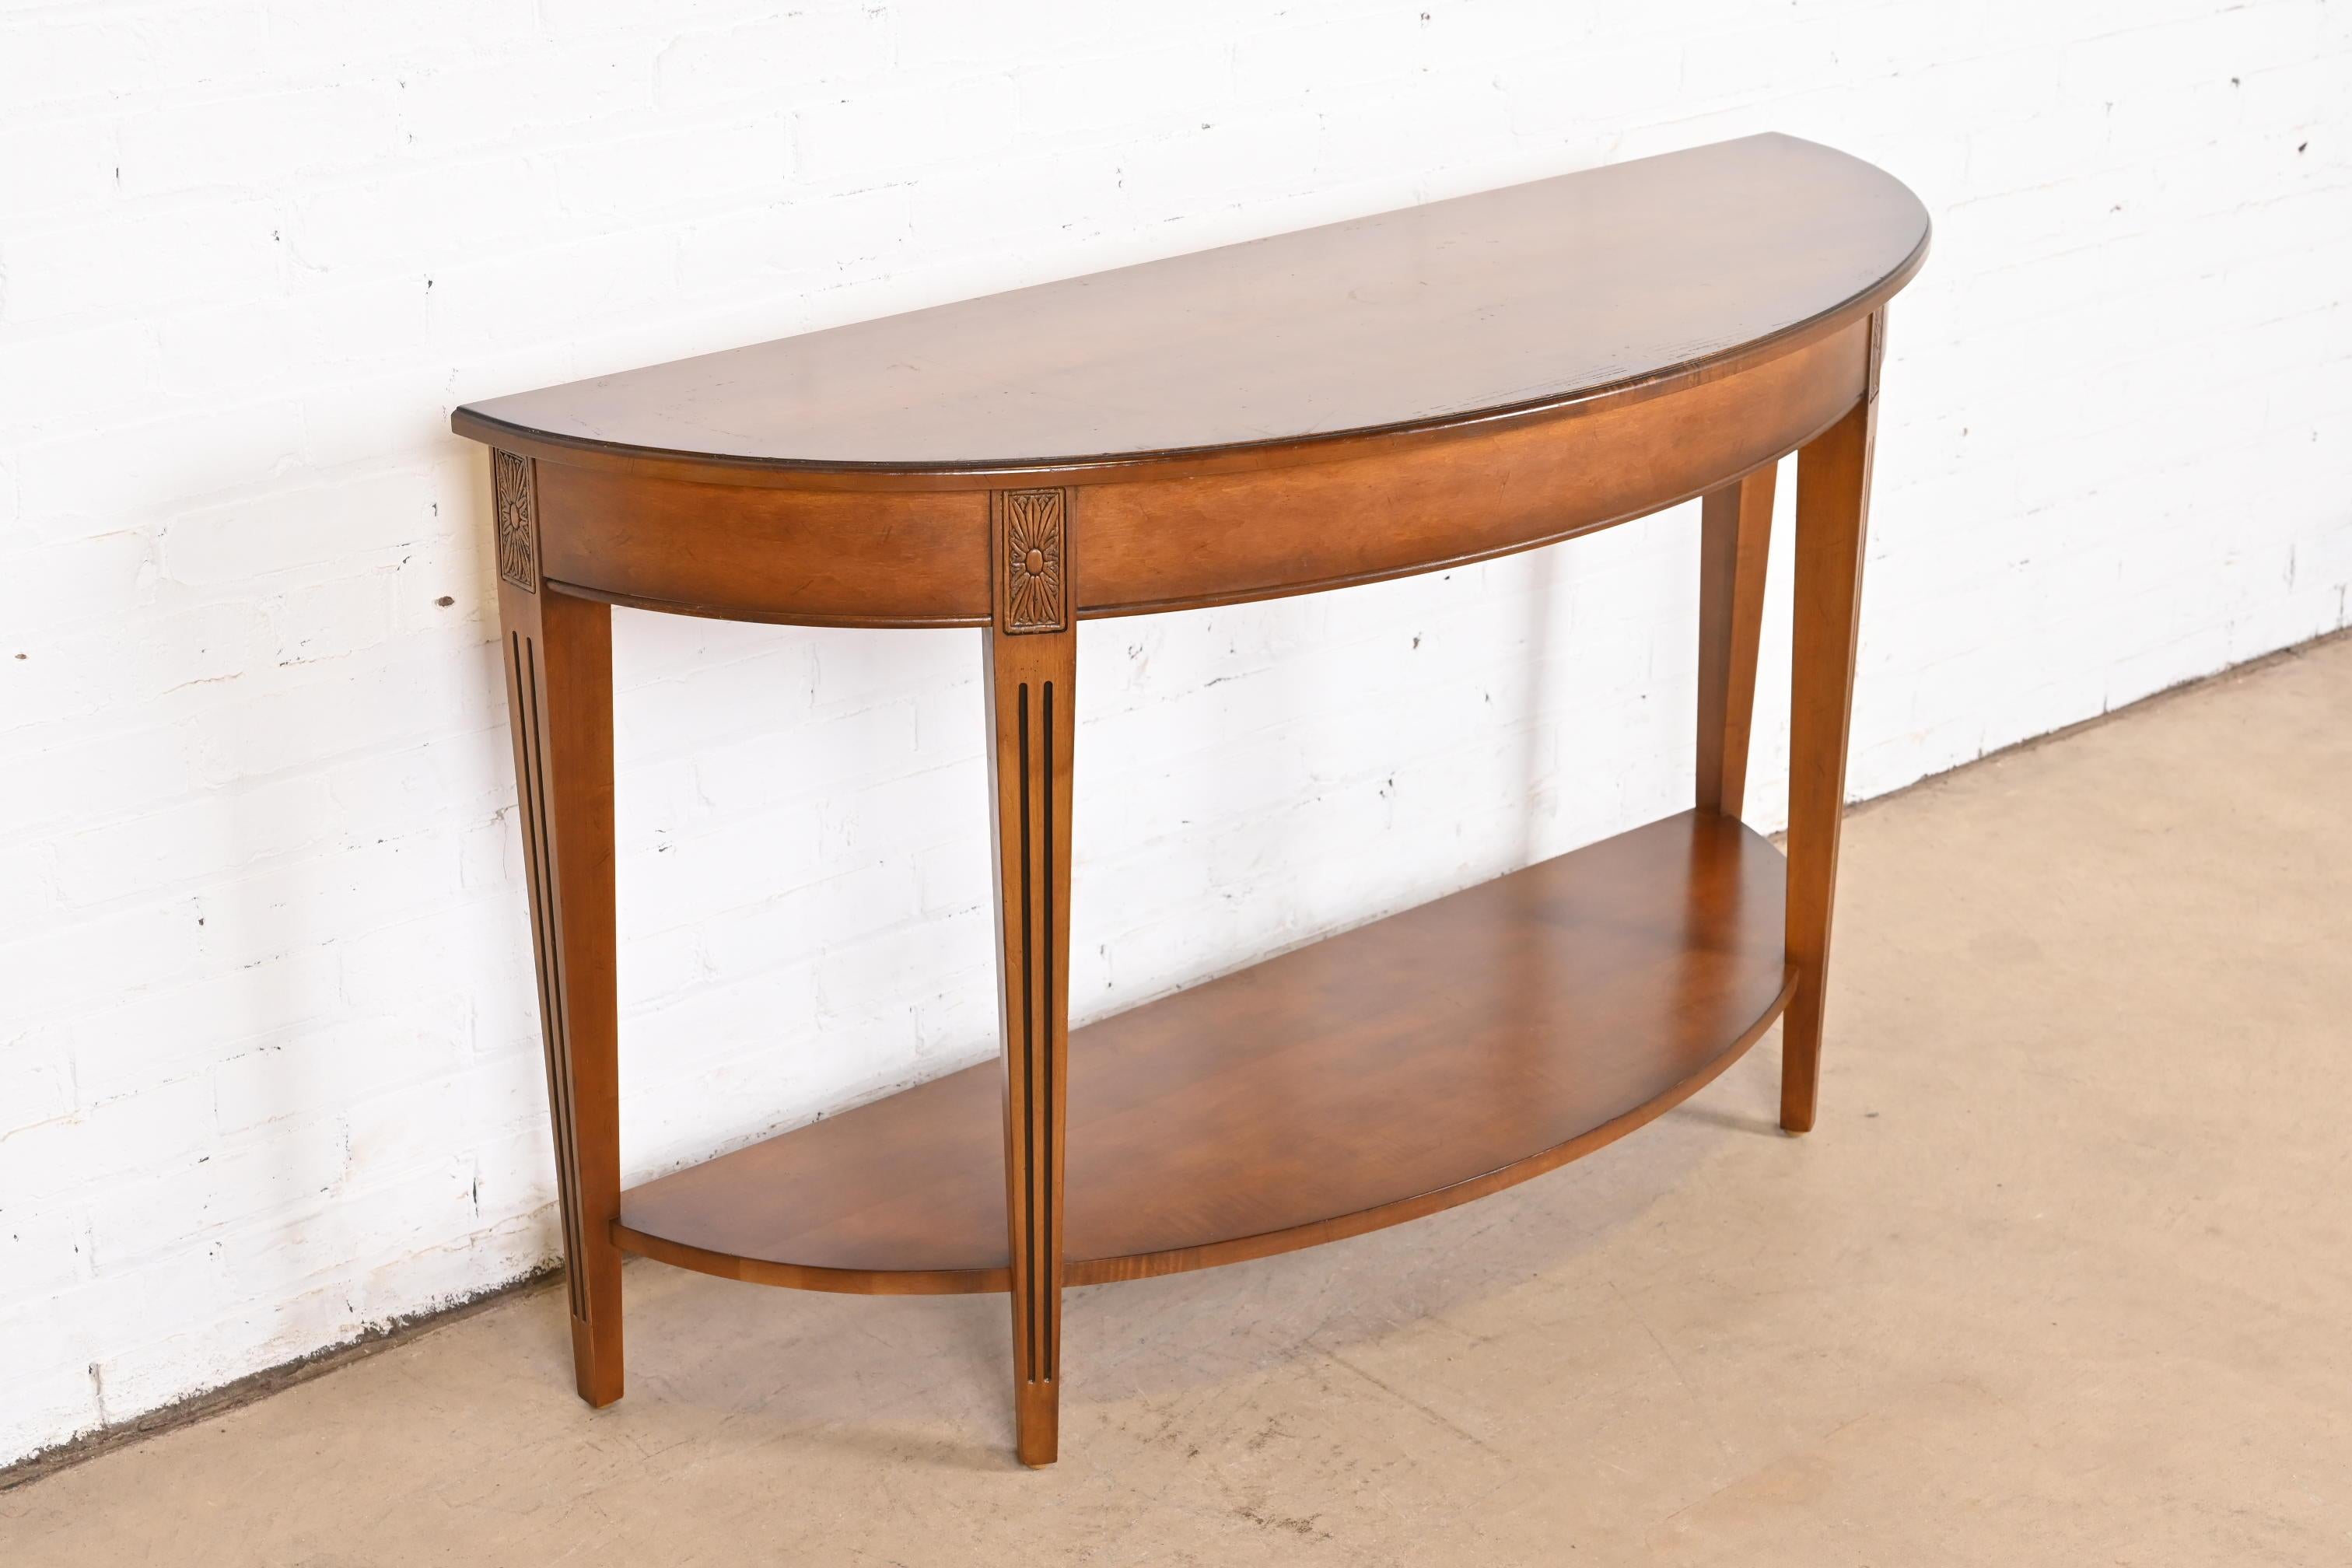 20th Century French Country Maple Demilune Console Table or Sofa Table For Sale